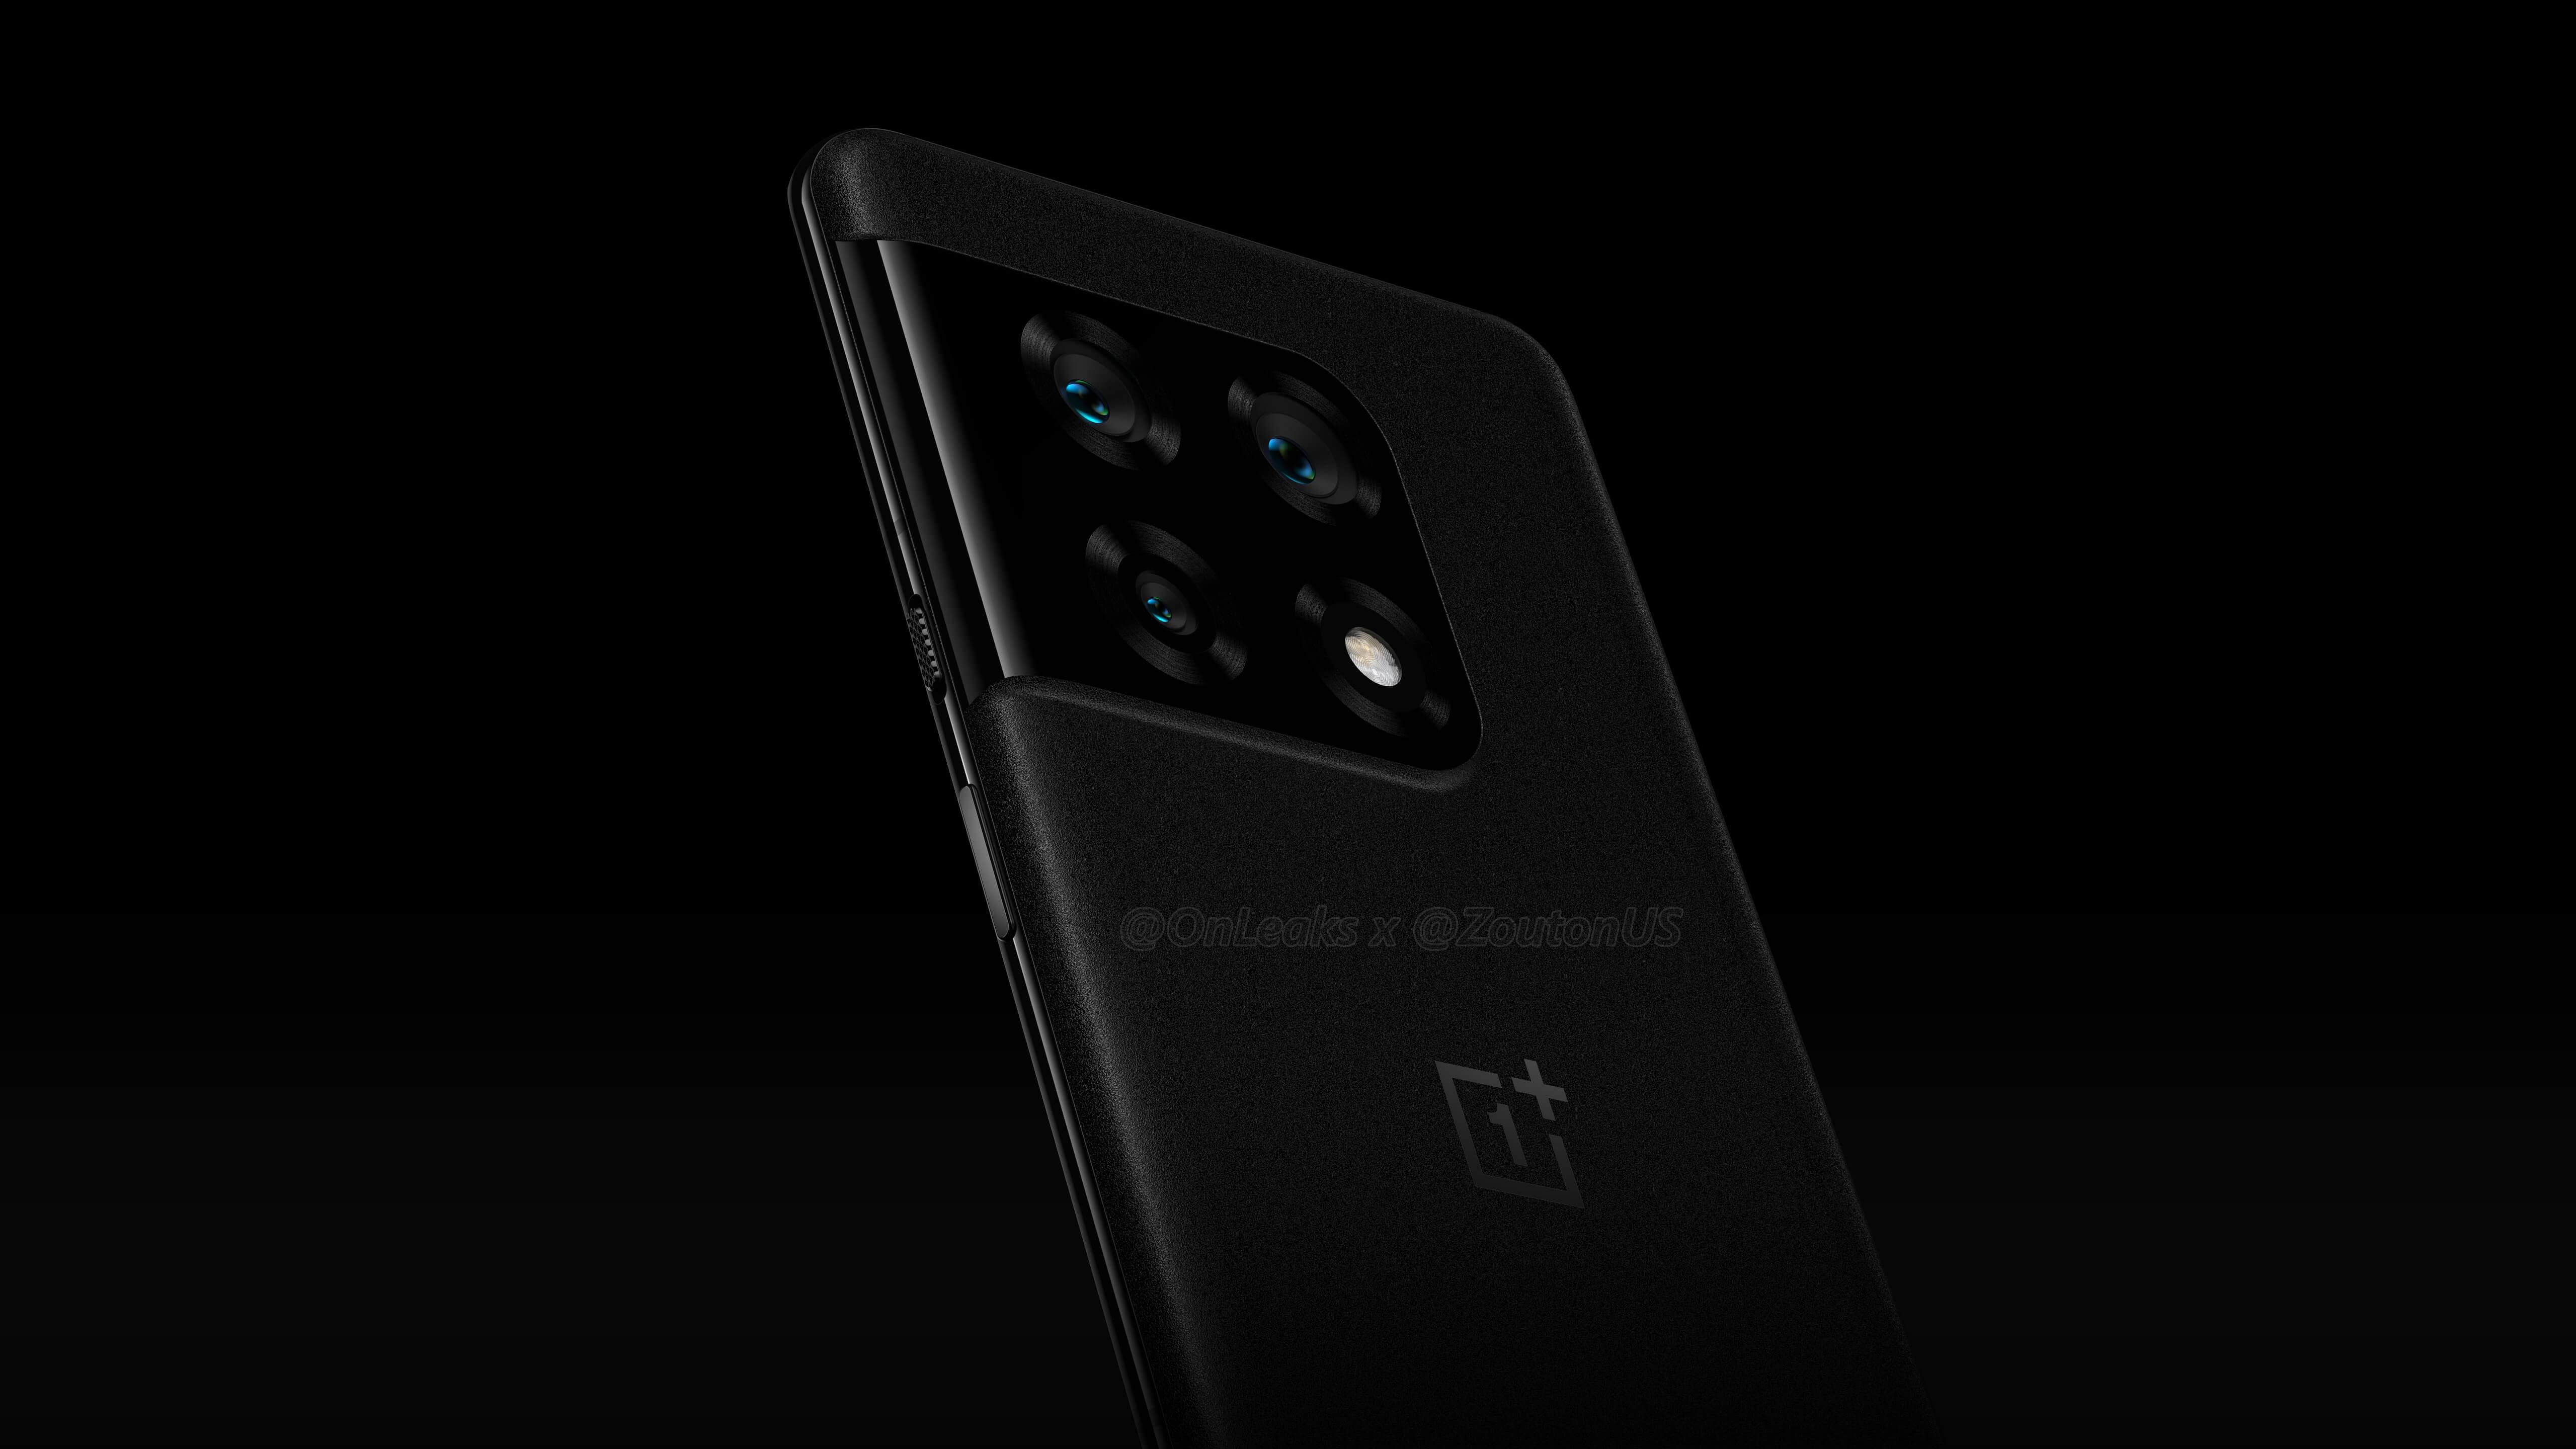 Leaked OnePlus 10 Pro render - OnePlus 10 Pro charging speed could put Apple, Samsung, and Google flagships to shame